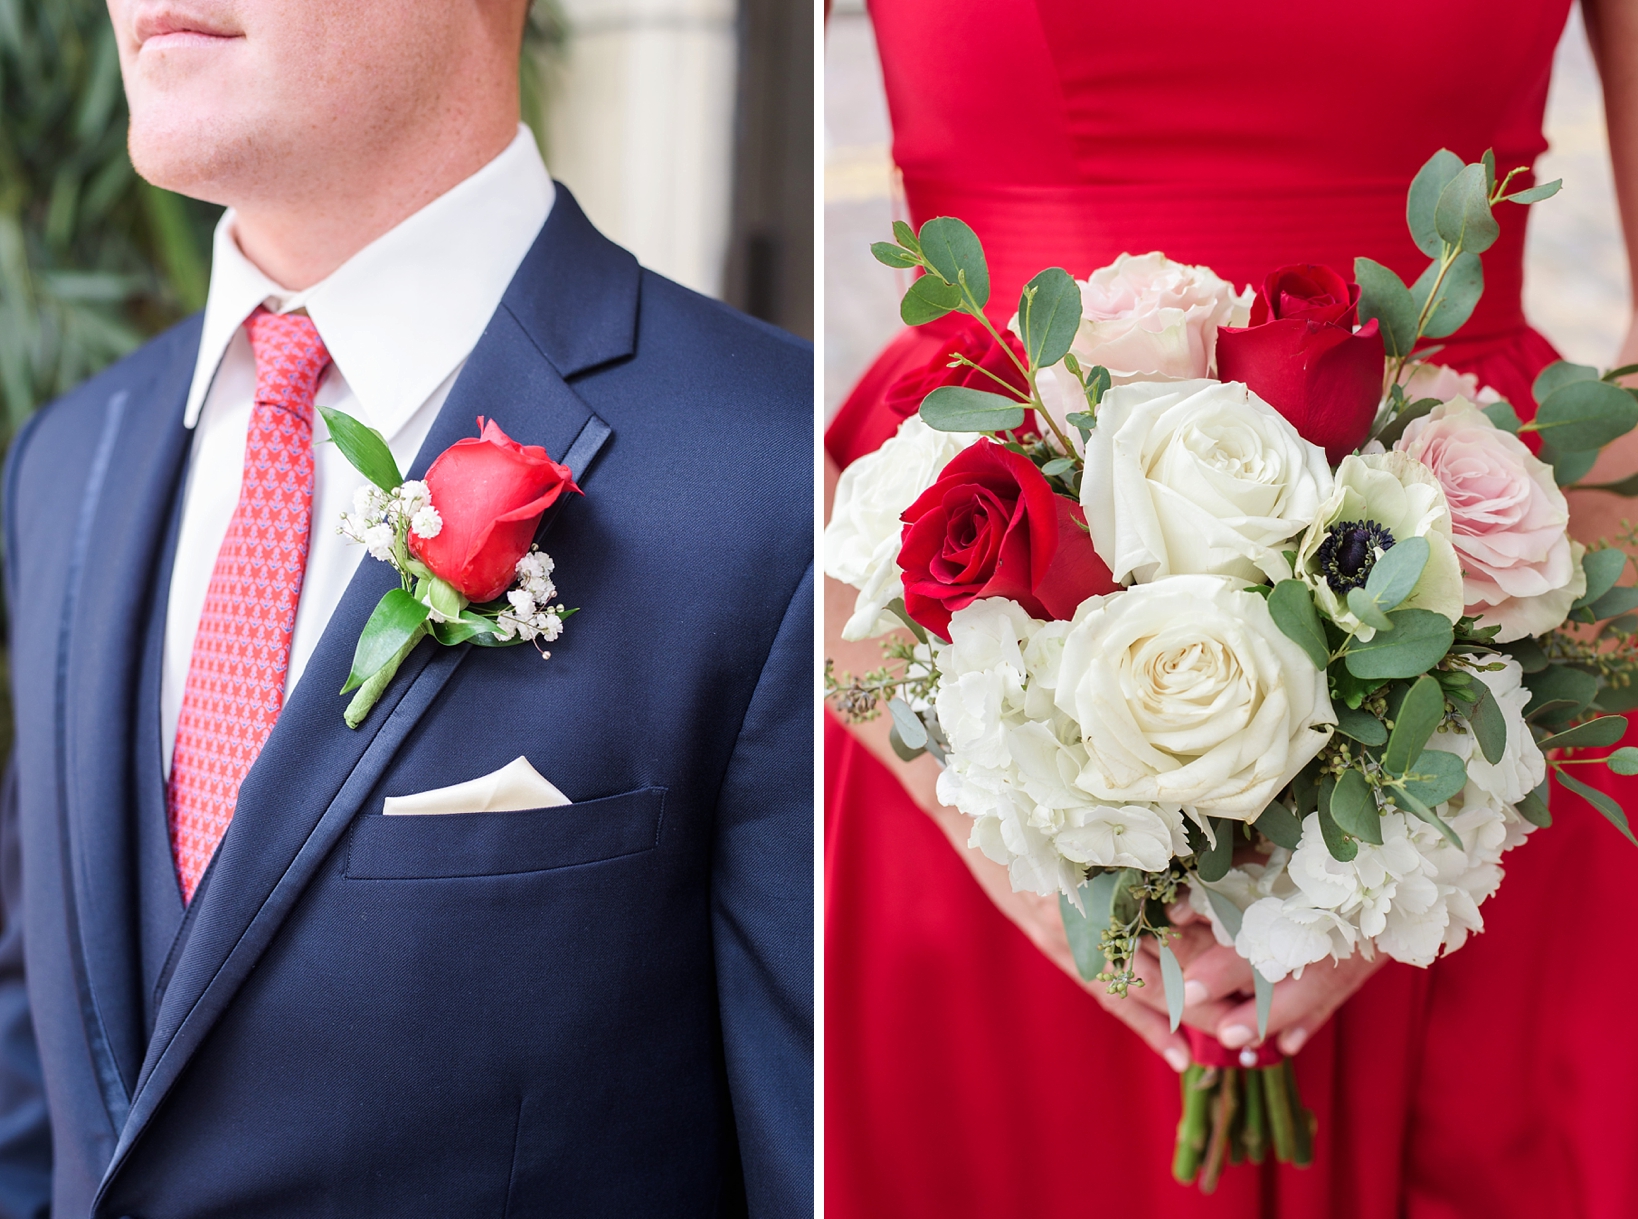 Red white and Blue were the colors of choice for this patriotic wedding day.